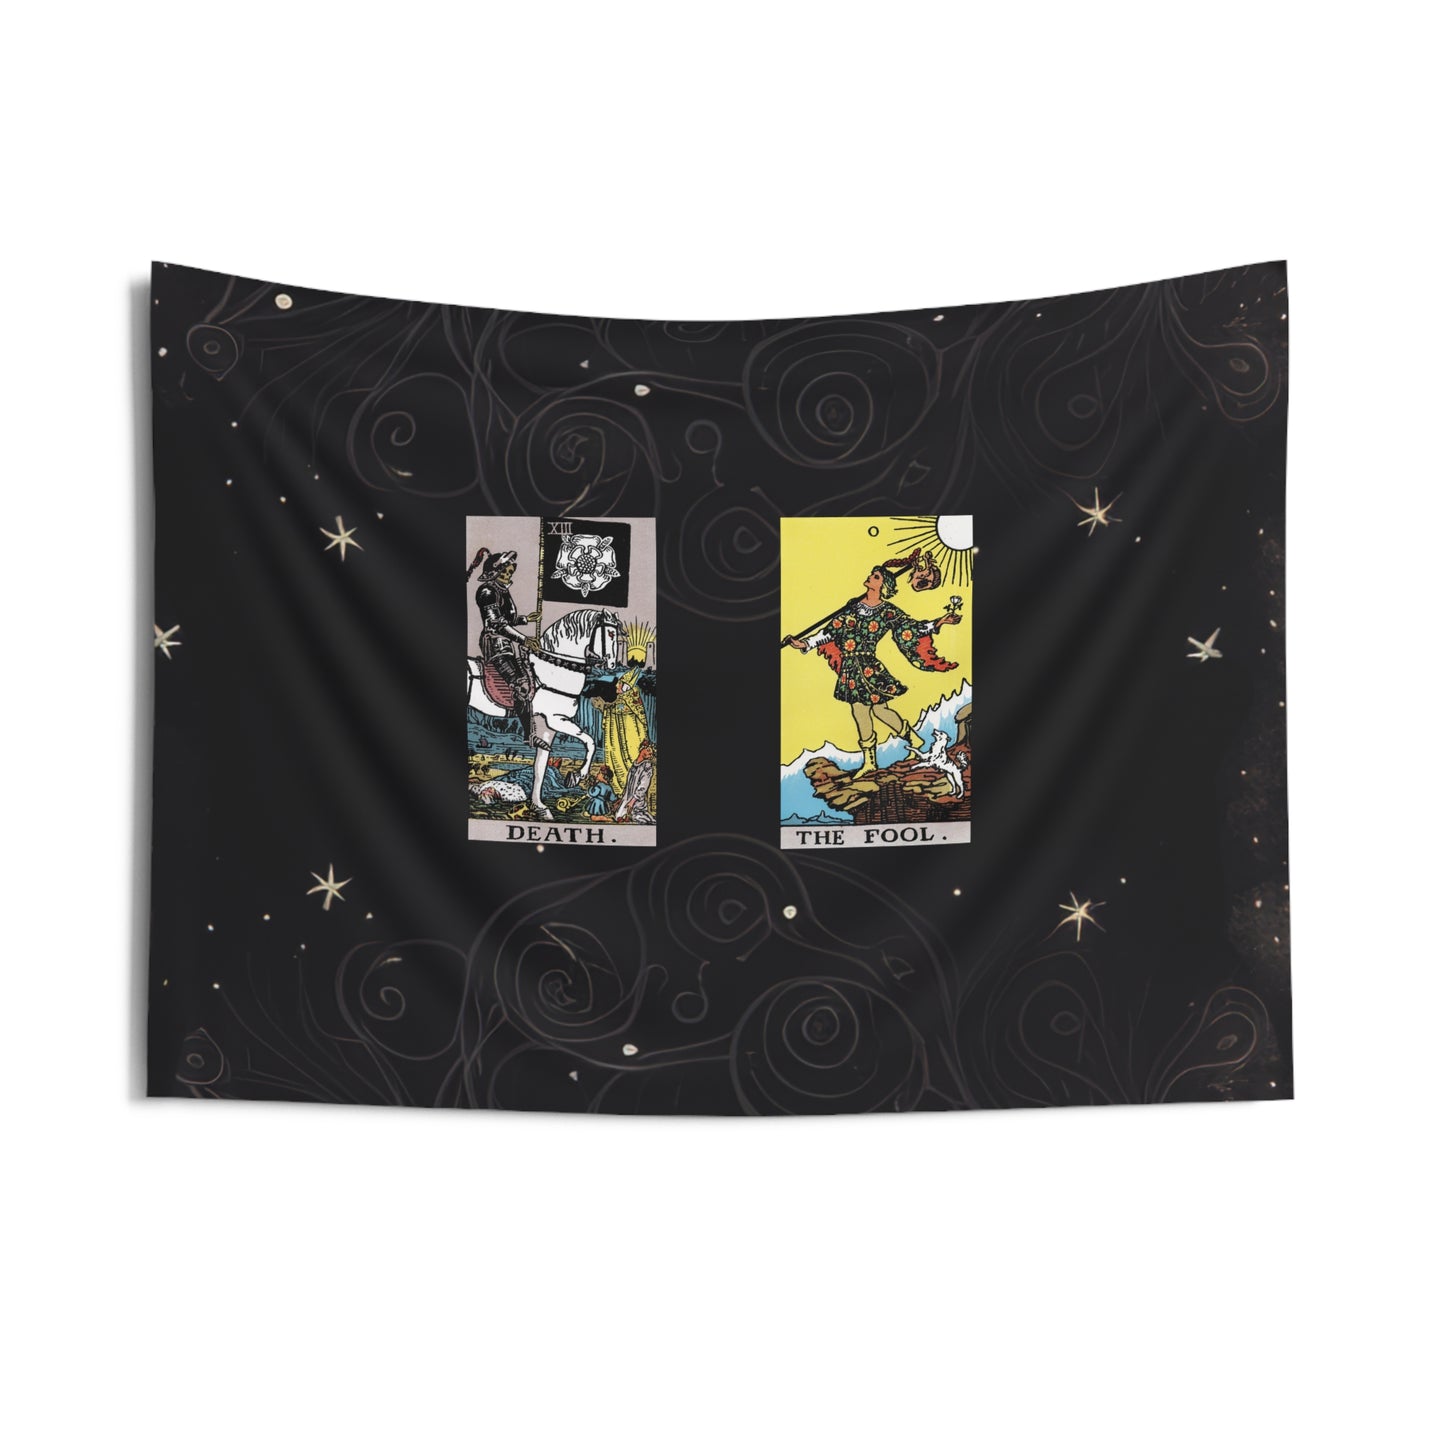 The Death AND The Fool Tarot Cards Altar Cloth or Tapestry with Starry Background